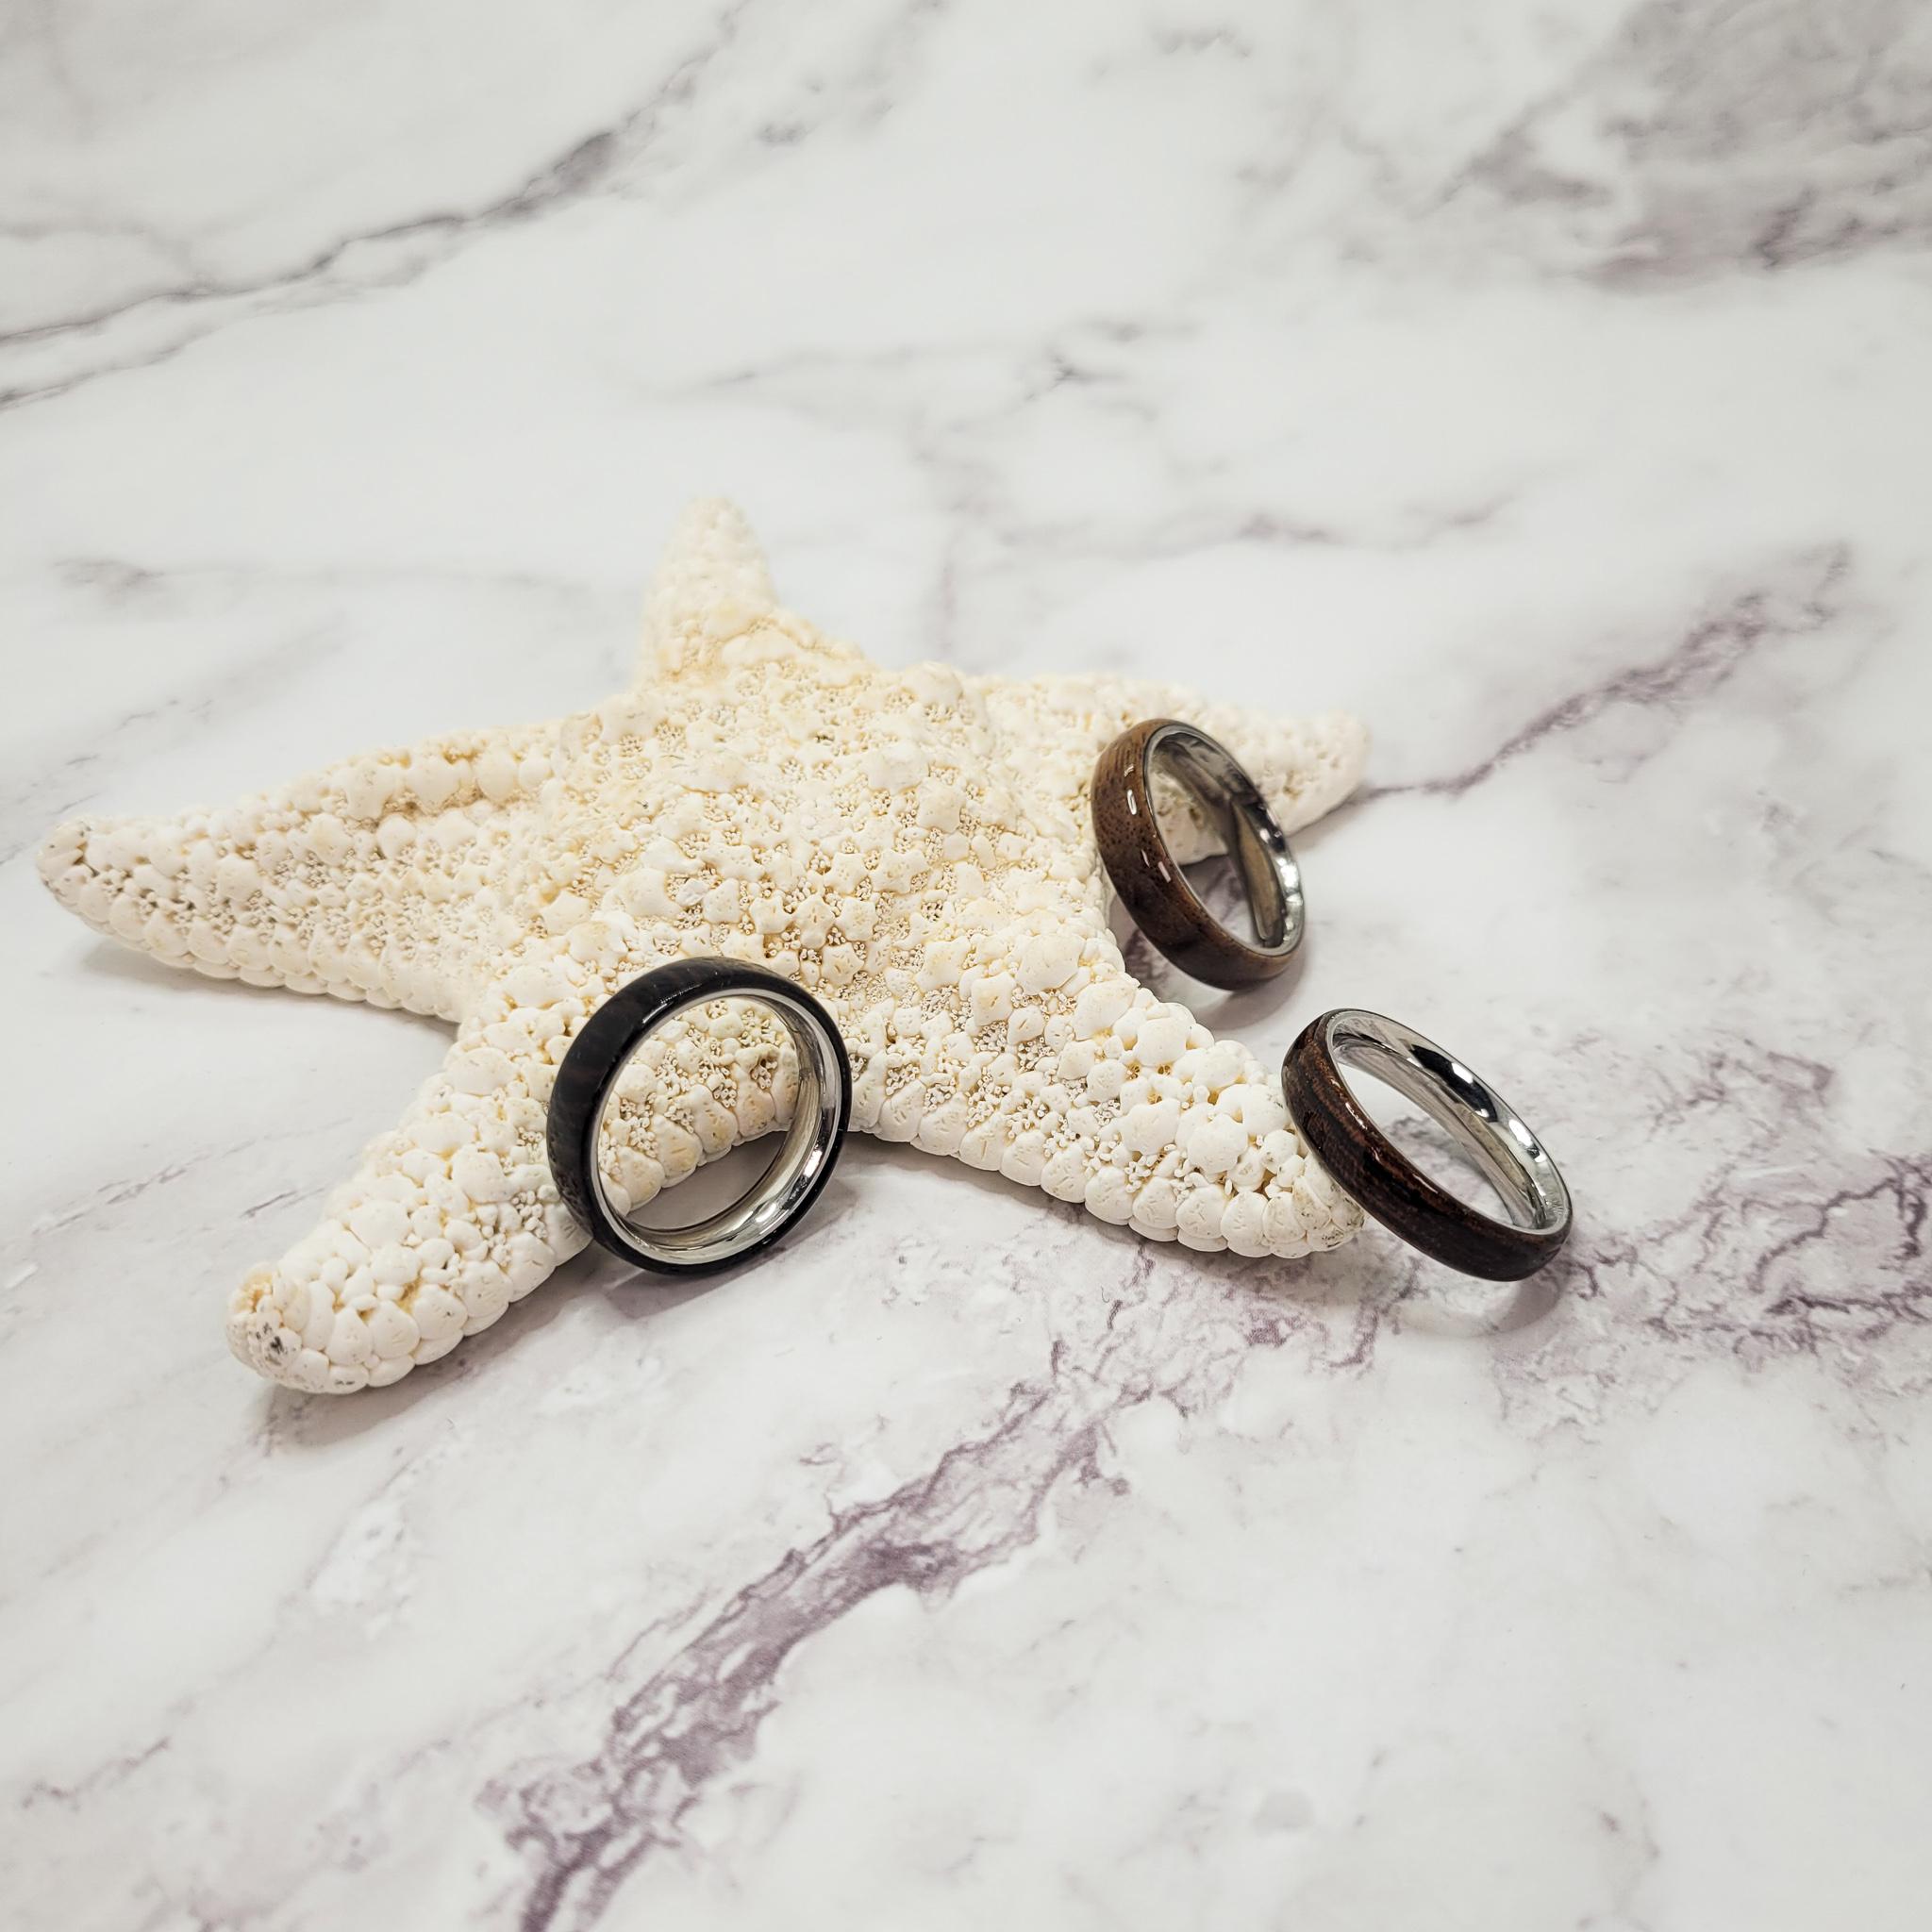 Exotic wood rings on display on a starfish